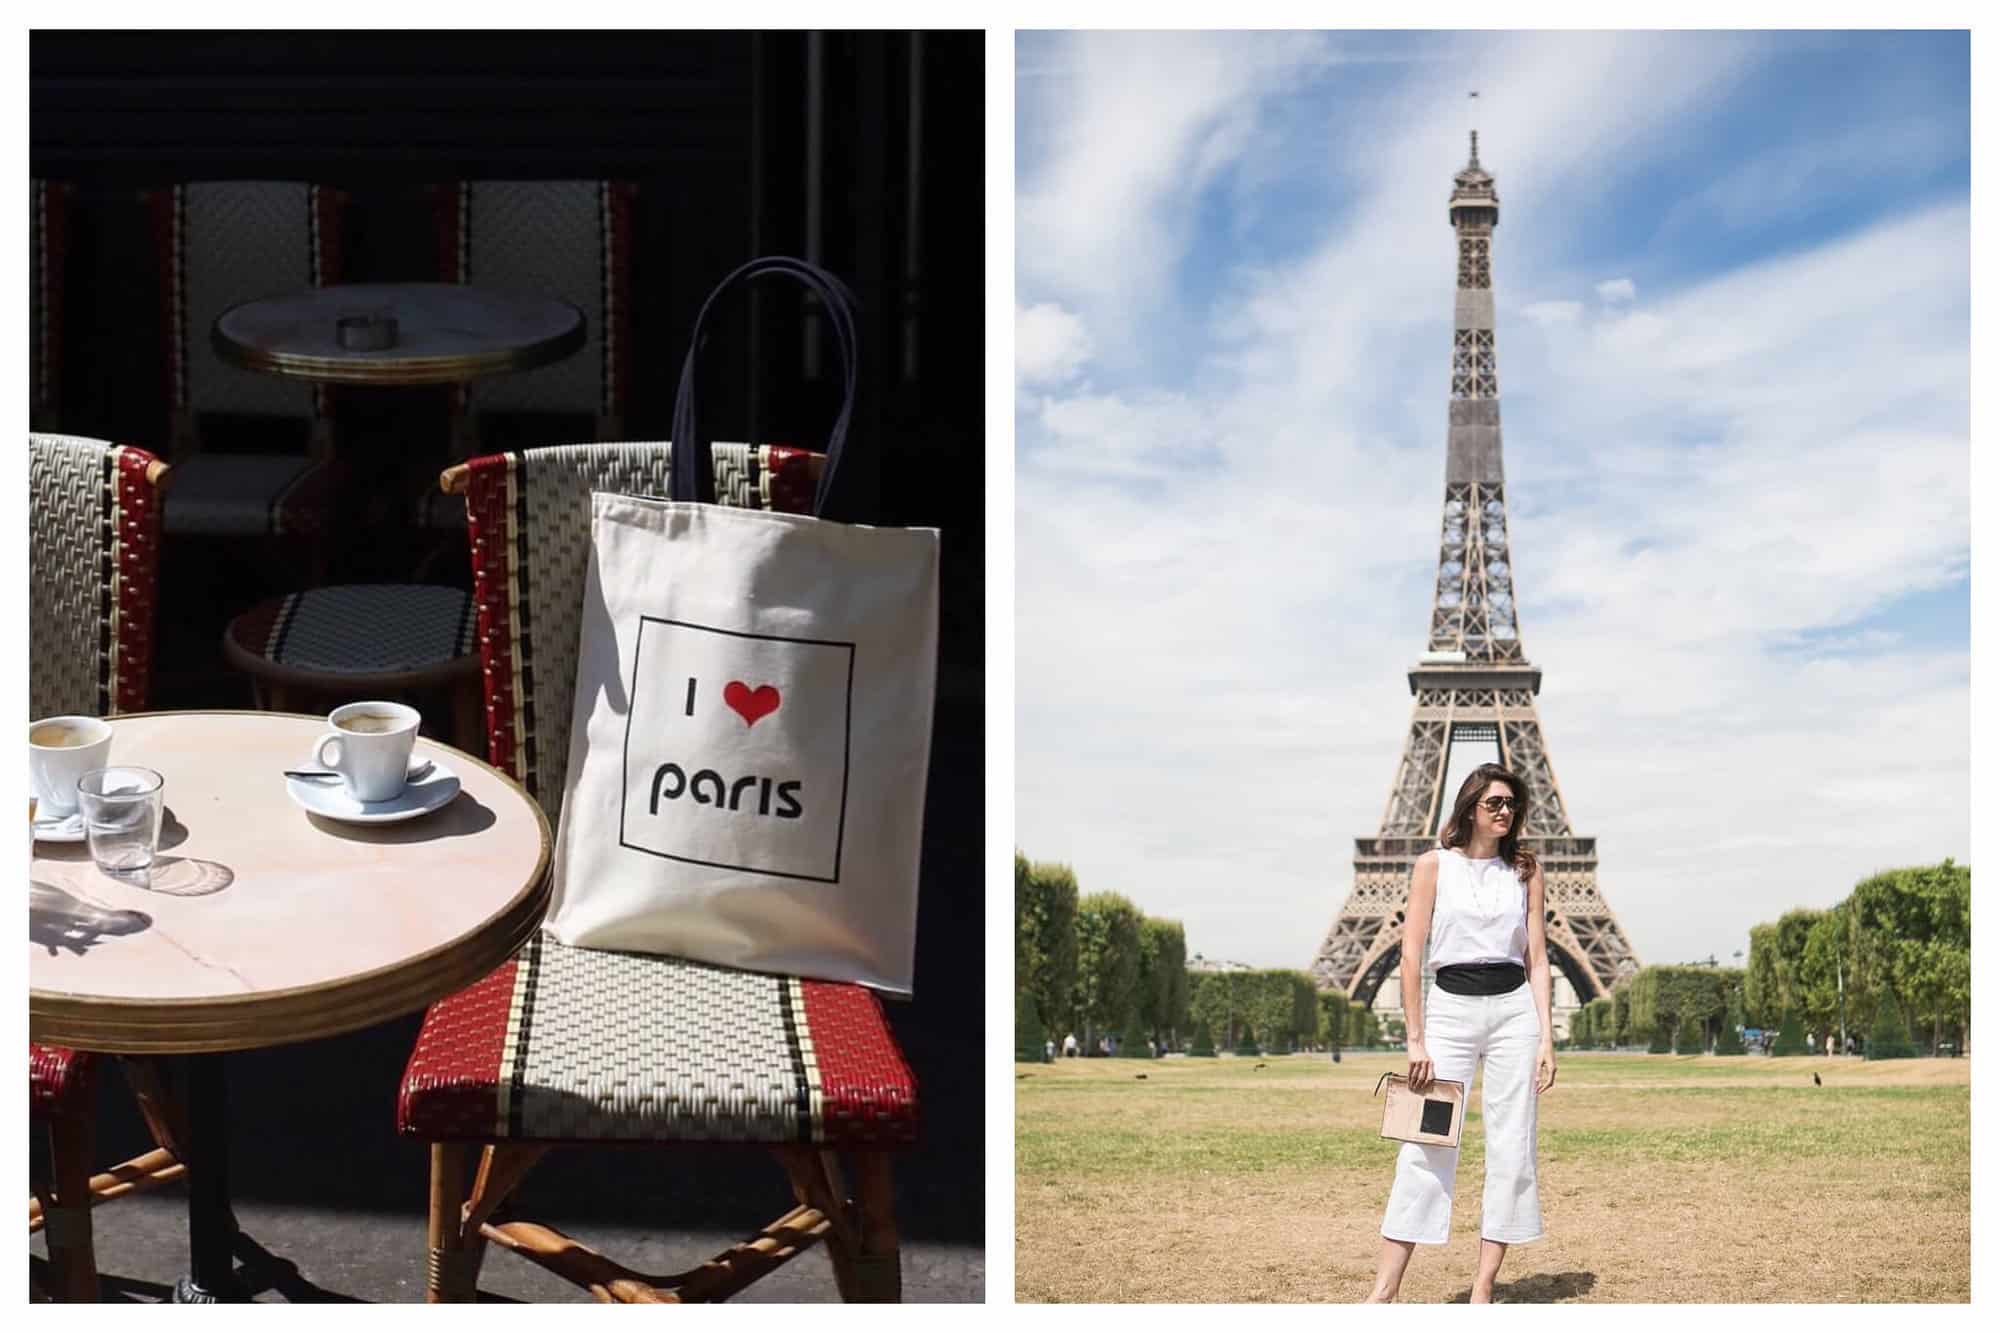 Left: A small round café table with two coffee cups on it, and two red and white chairs are pictured on a terrace. There is a white canvas tote bag resting on one of the chairs that reads "I <3 Paris." Left: A woman stands centered in front of the Eiffel Tower in Champs de Mars.